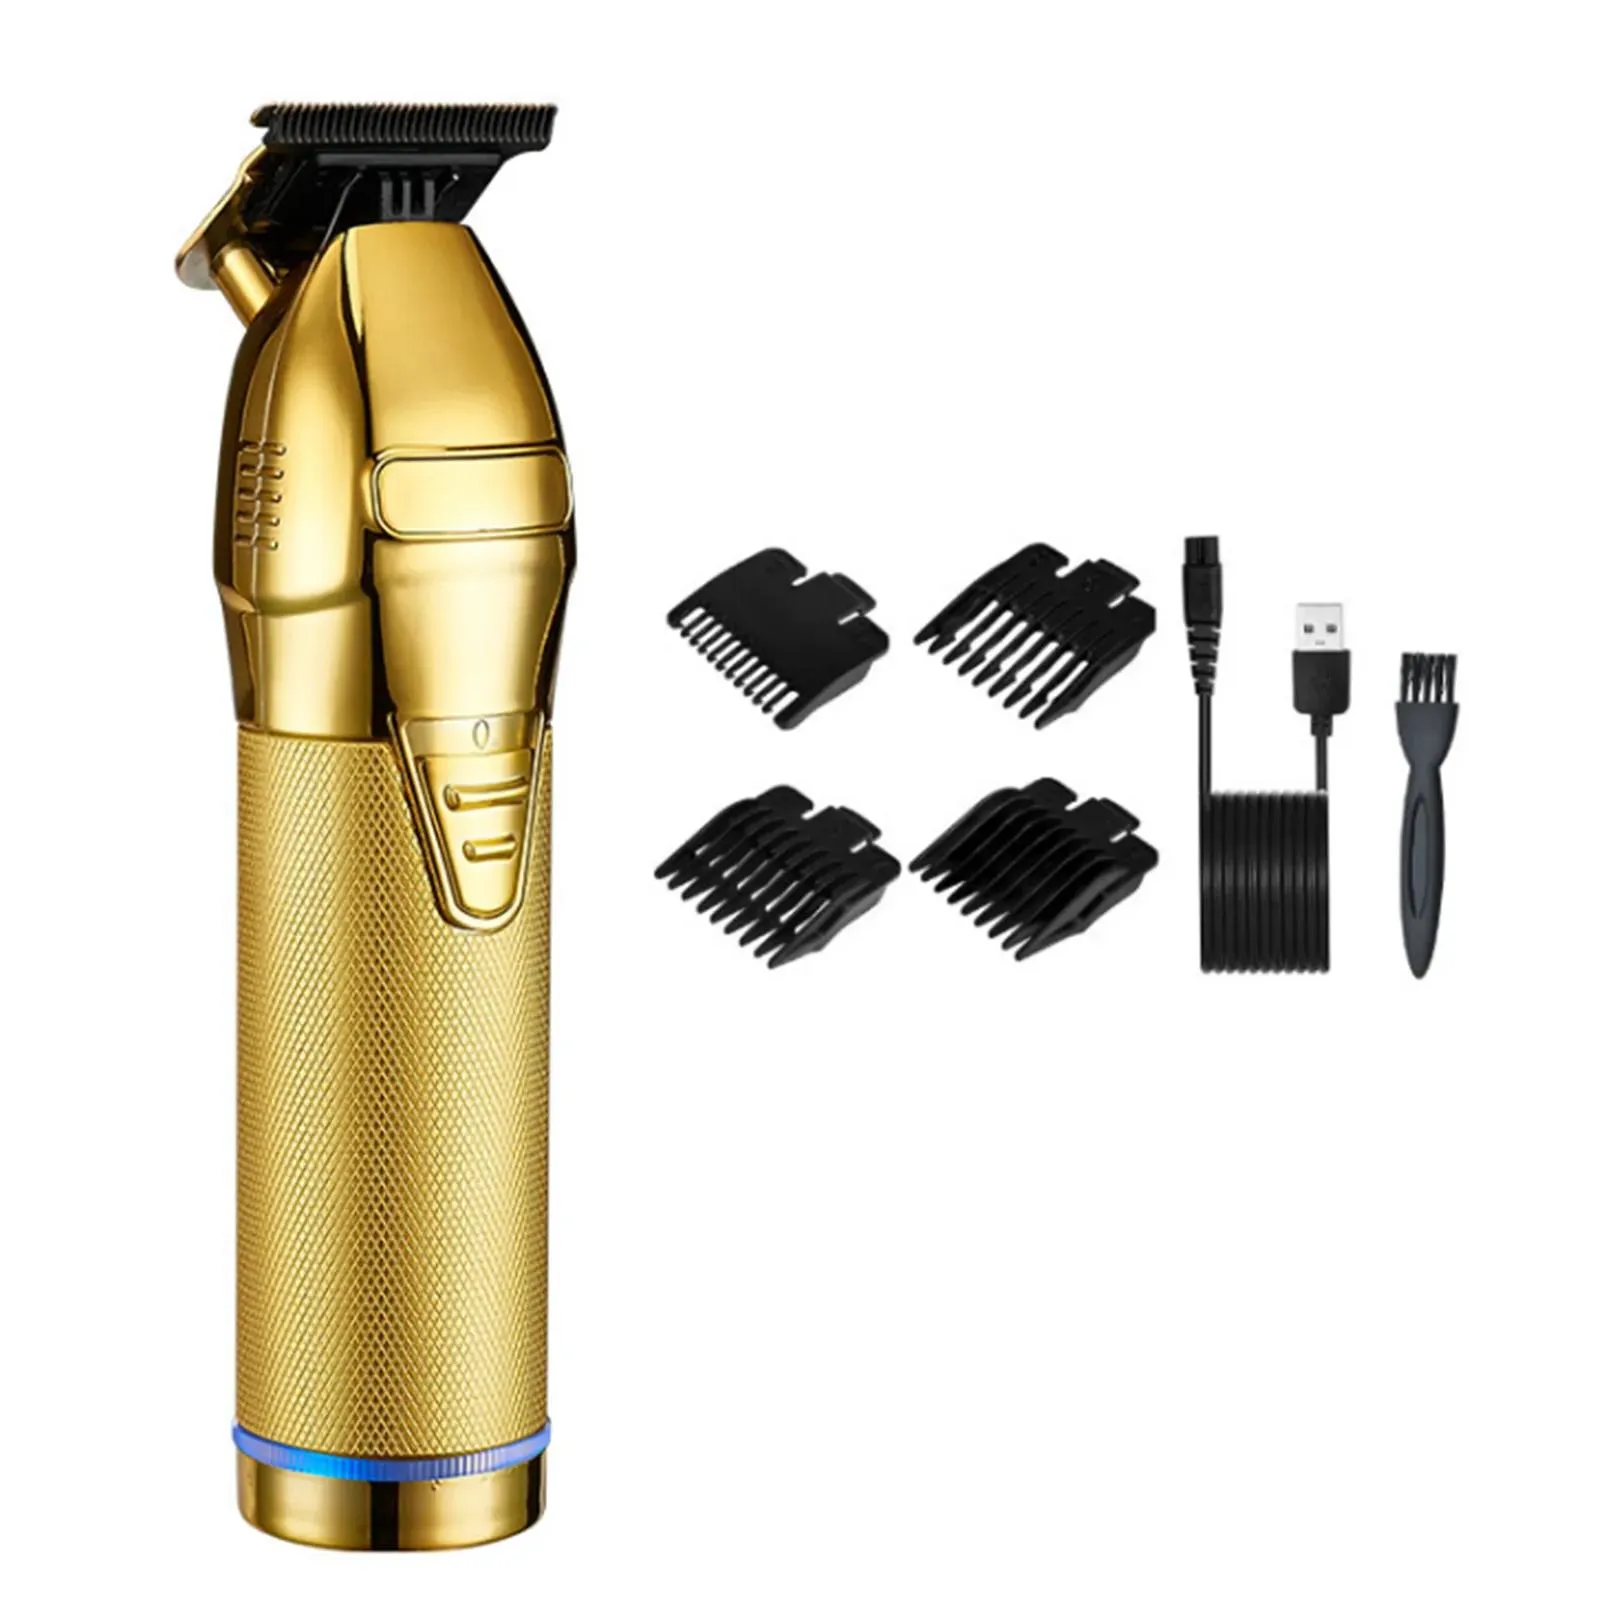 Hair Trimmer Hair Clippers with Guide Combs Men Cordless Hair Cutting Trimmer Kit Electric Haircut Kit Beard Trimmer Barber Hair Styling Tool